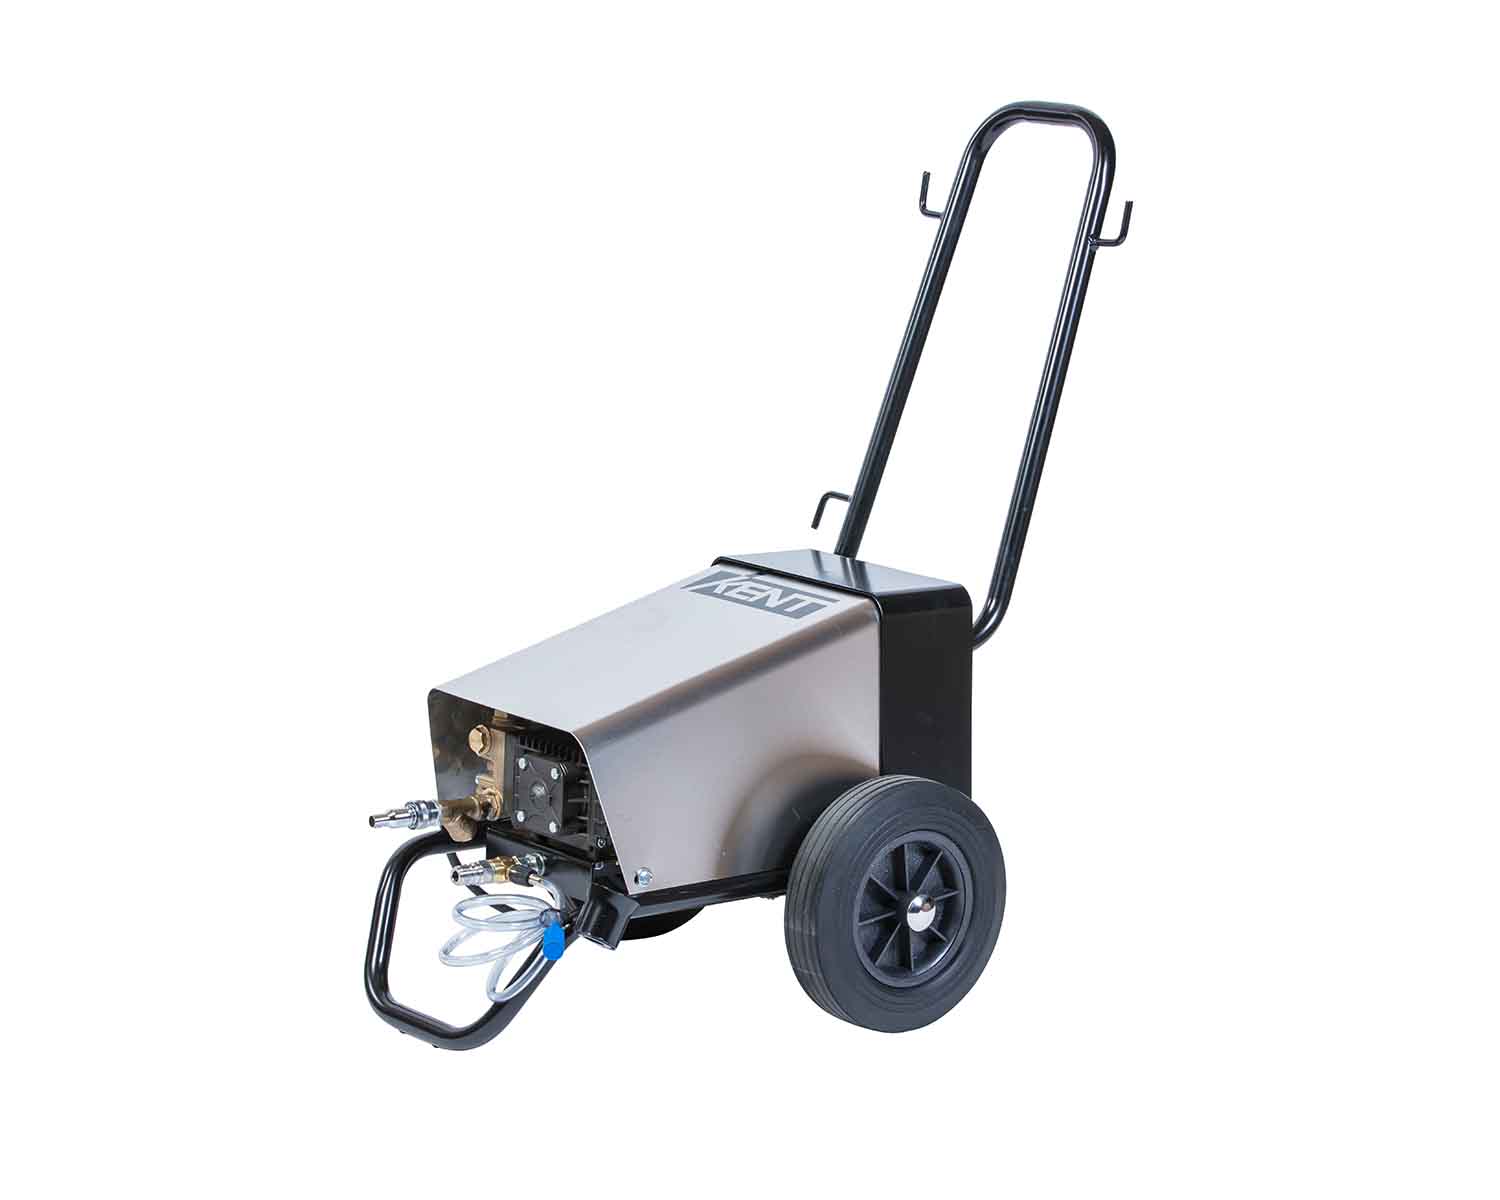 Cold water Two-wheeled pressure washer for small jobs